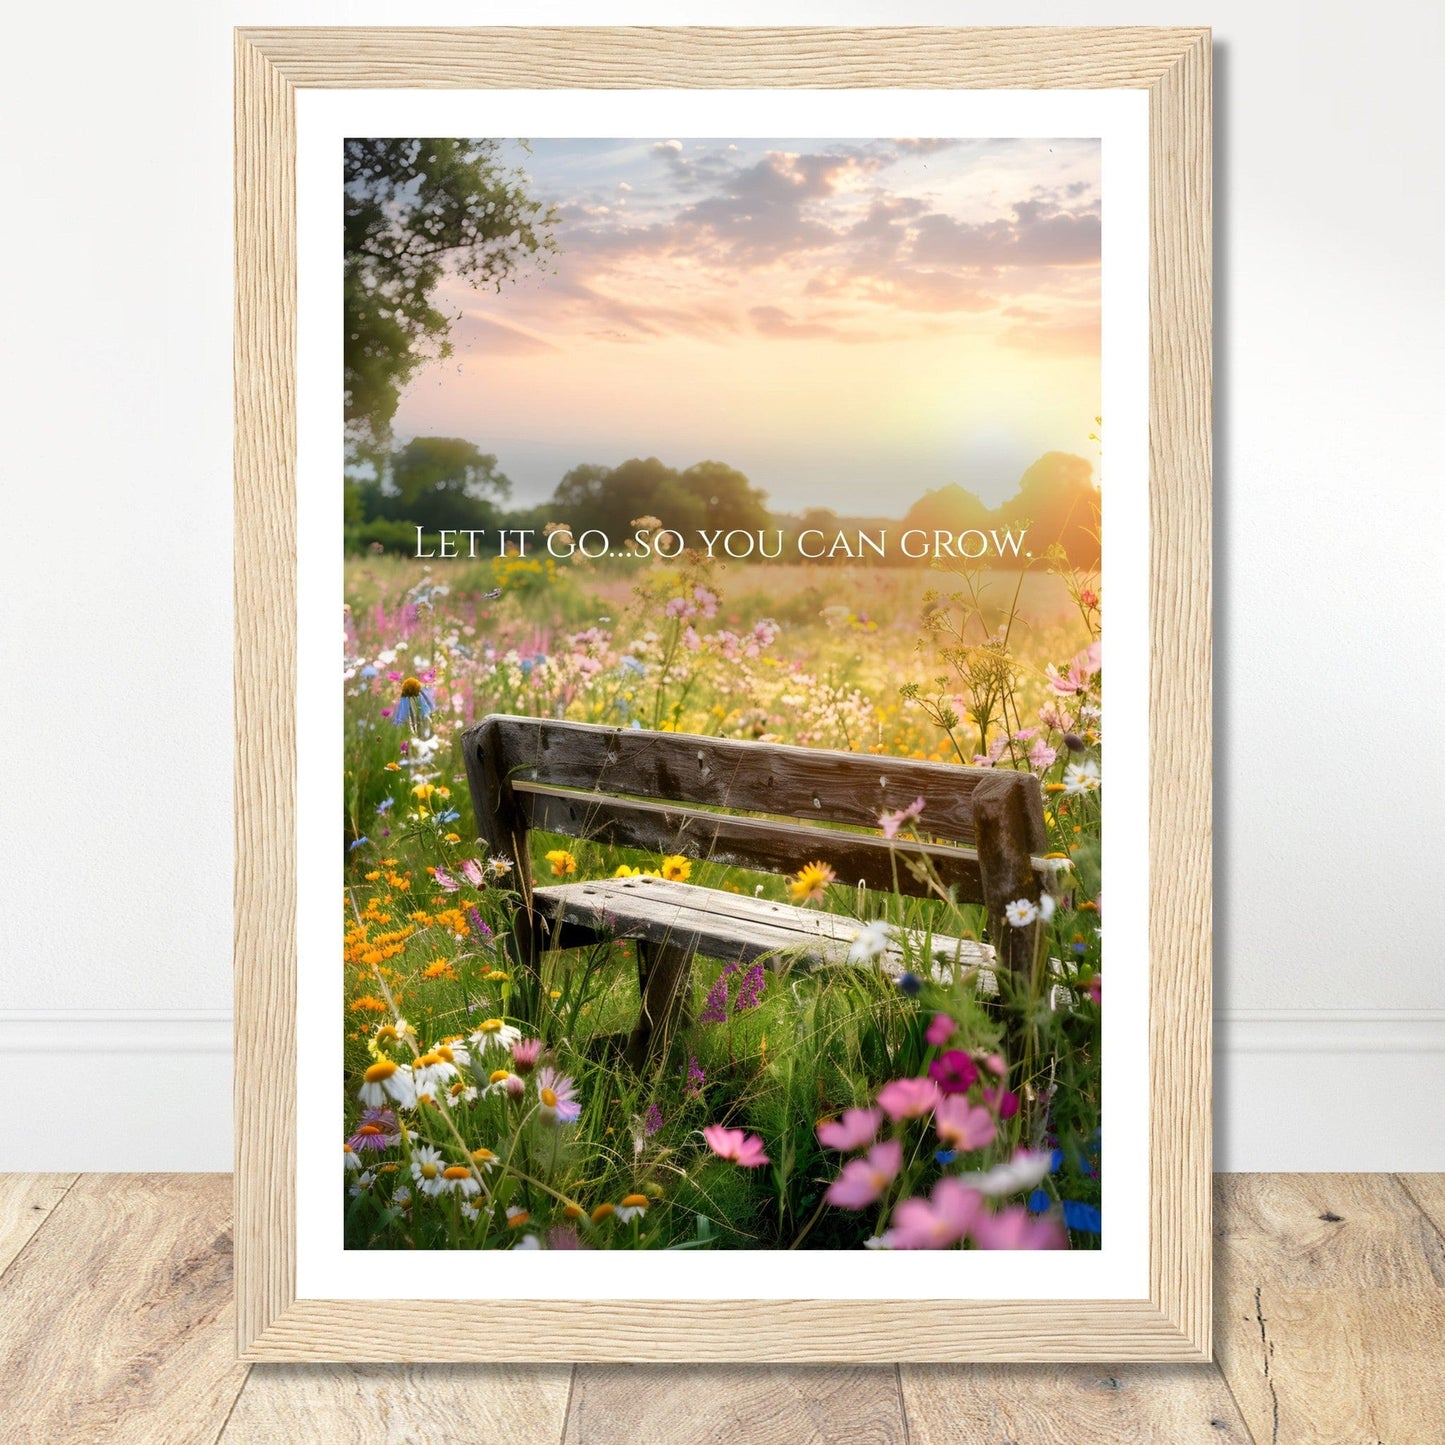 Coffee With My Father Print Material A4 21x29.7 cm / 8x12″ / Wood frame Grow - Artwork